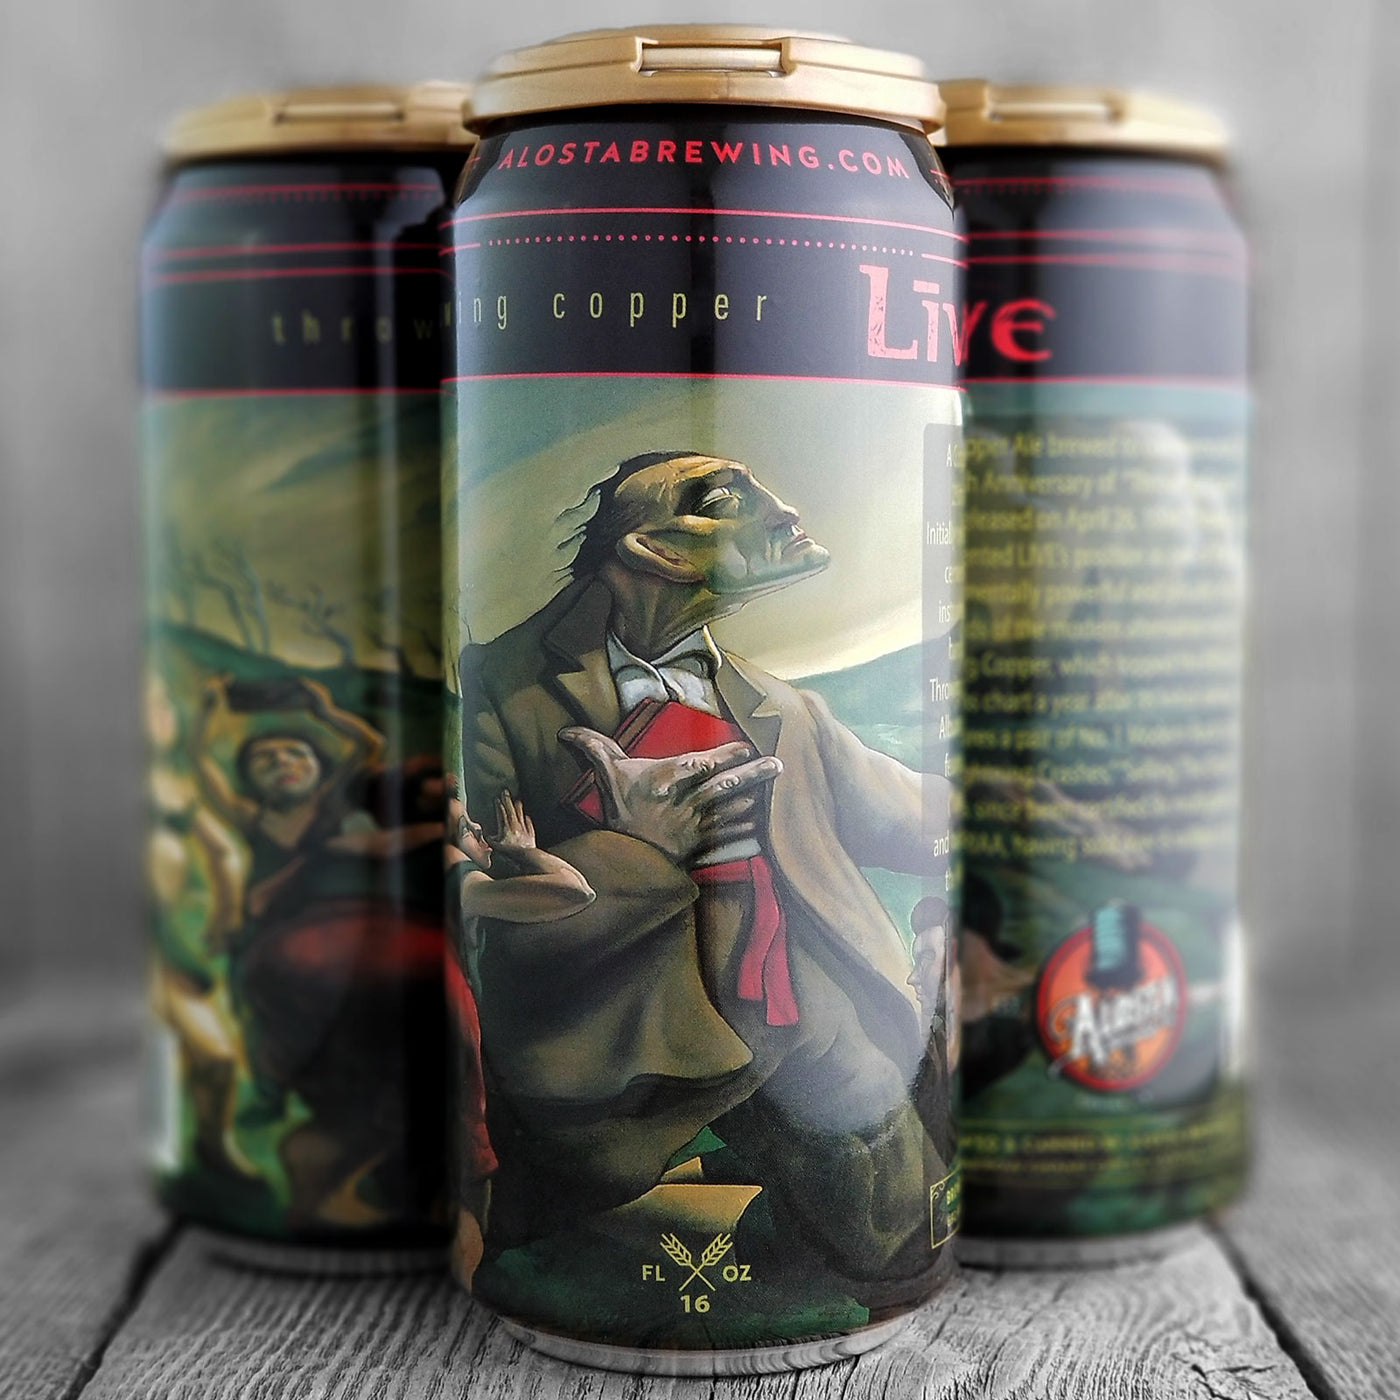 Throwing Copper Ale